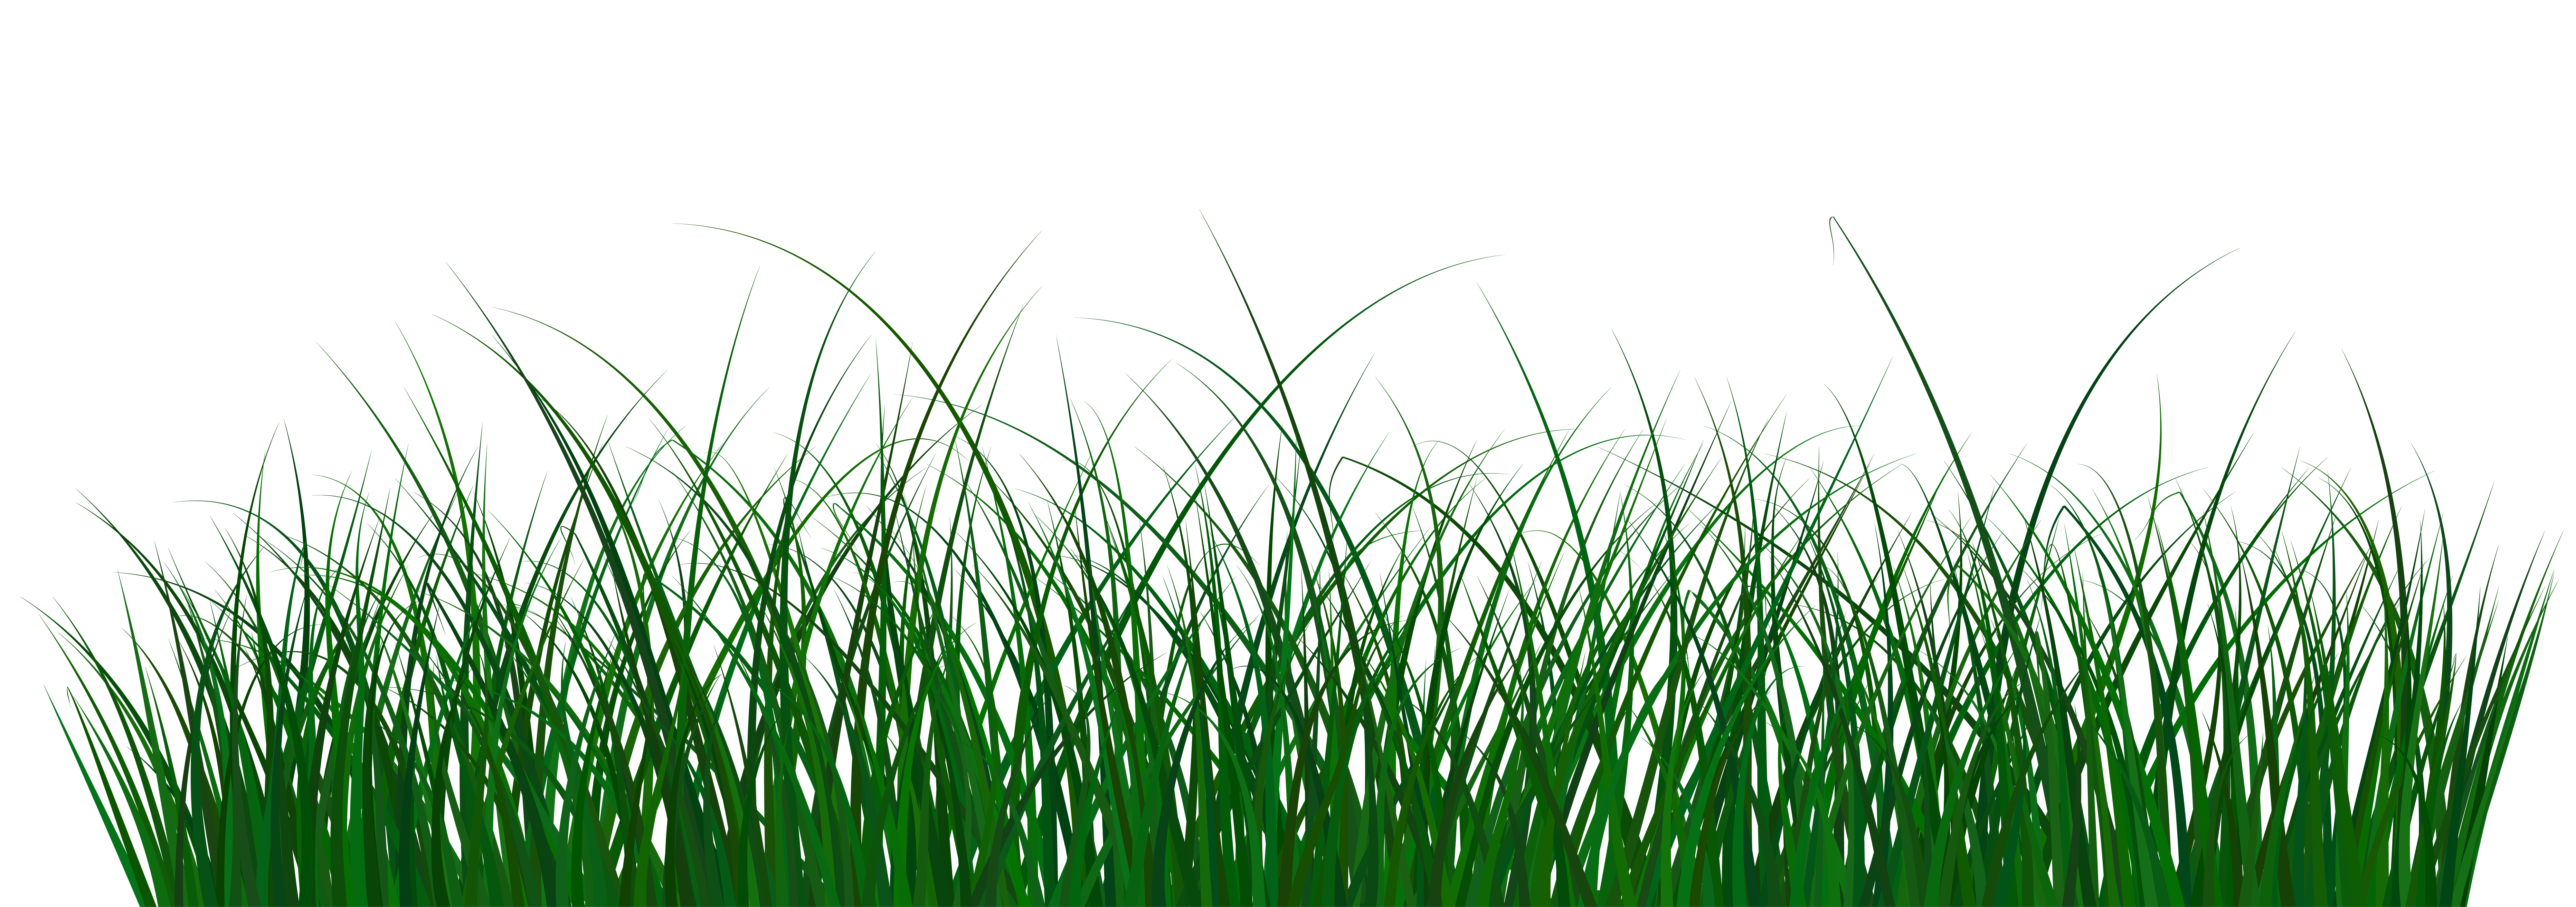 Green Grass Png Clip Art Image Gallery Yopriceville High Quality Images And Transparent Png Free Clipart